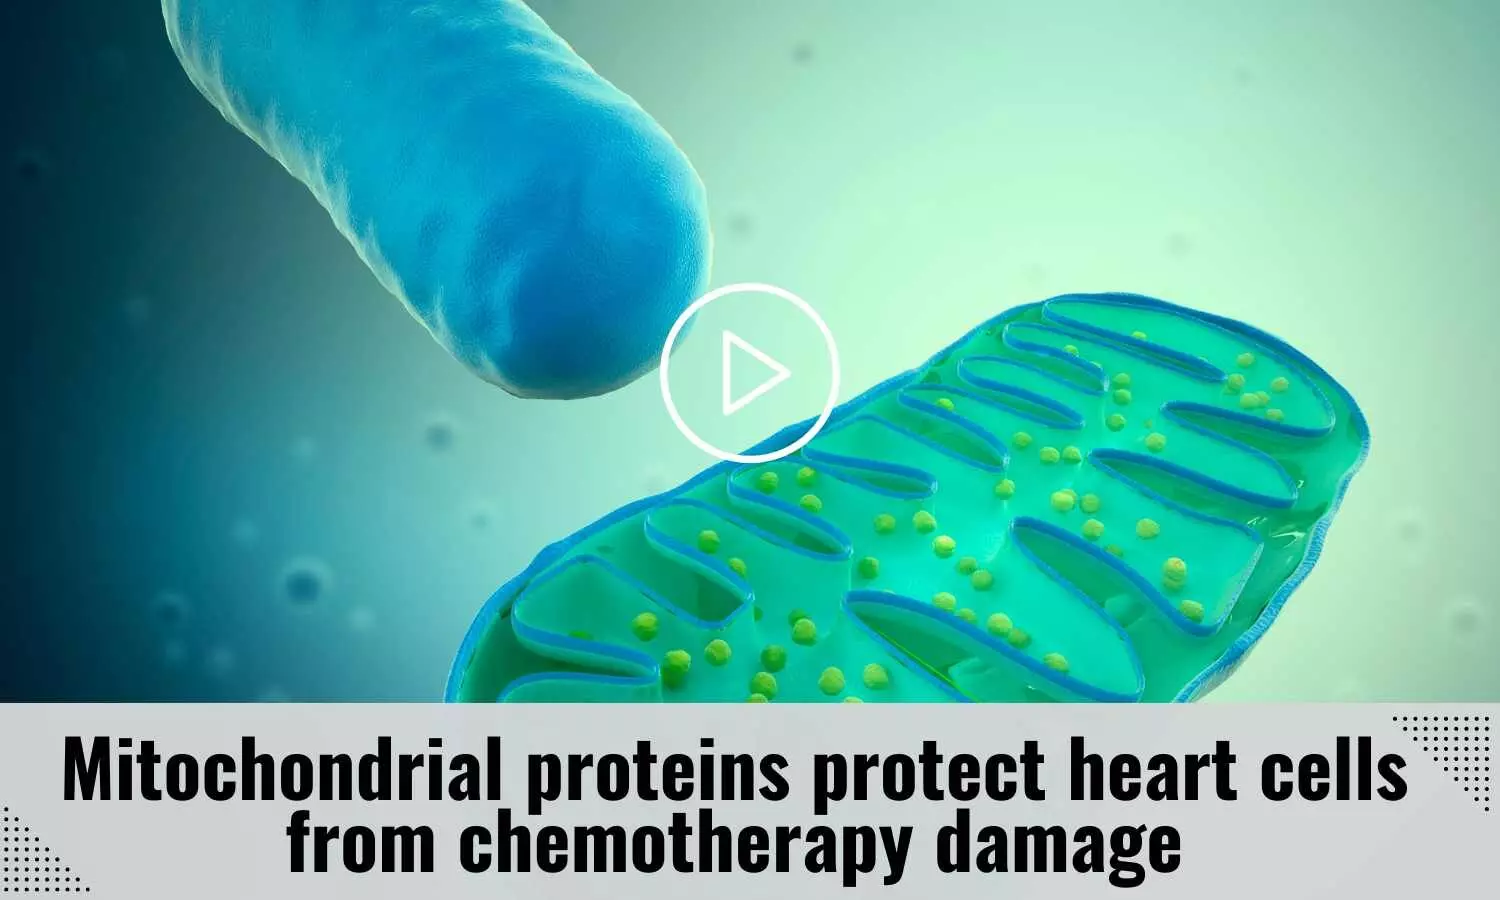 Mitochondrial proteins protect heart cells from chemotherapy damage